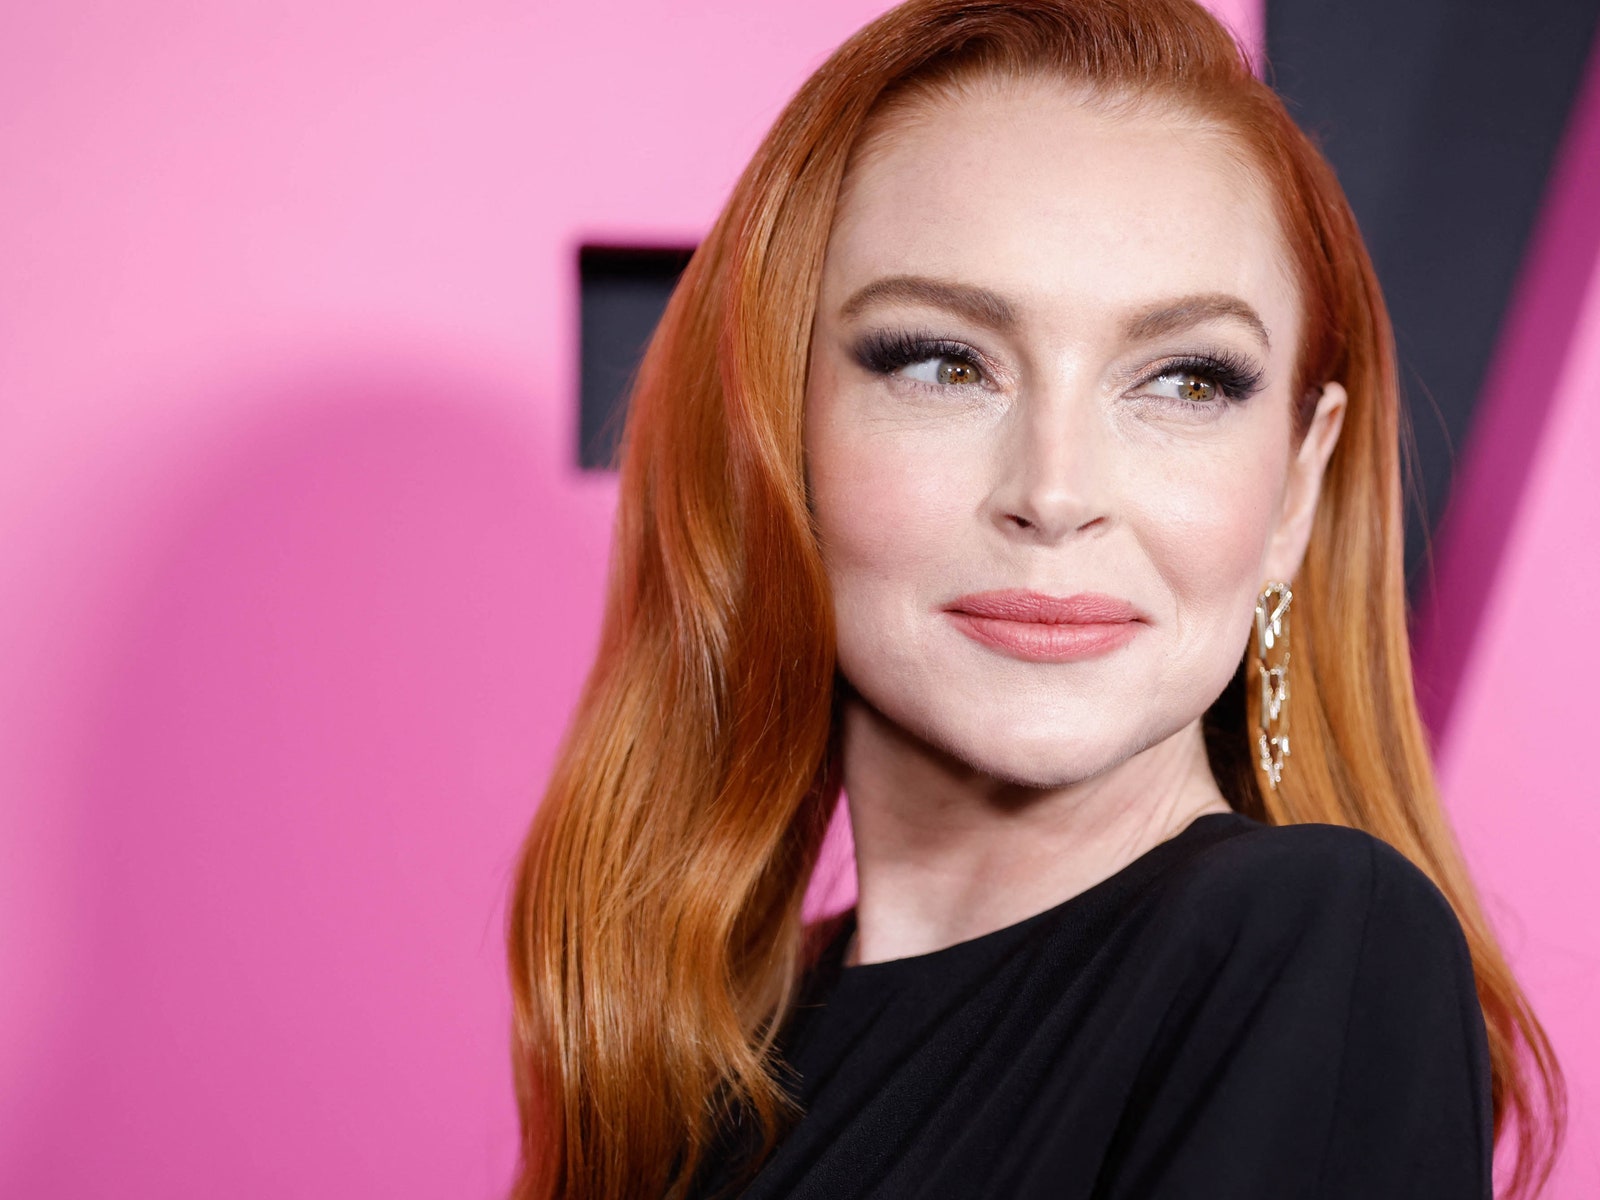 Lindsay Lohan’s Cutout Dress at the Mean Girls Premiere Proves She’s Still a ‘Regulation Hottie’